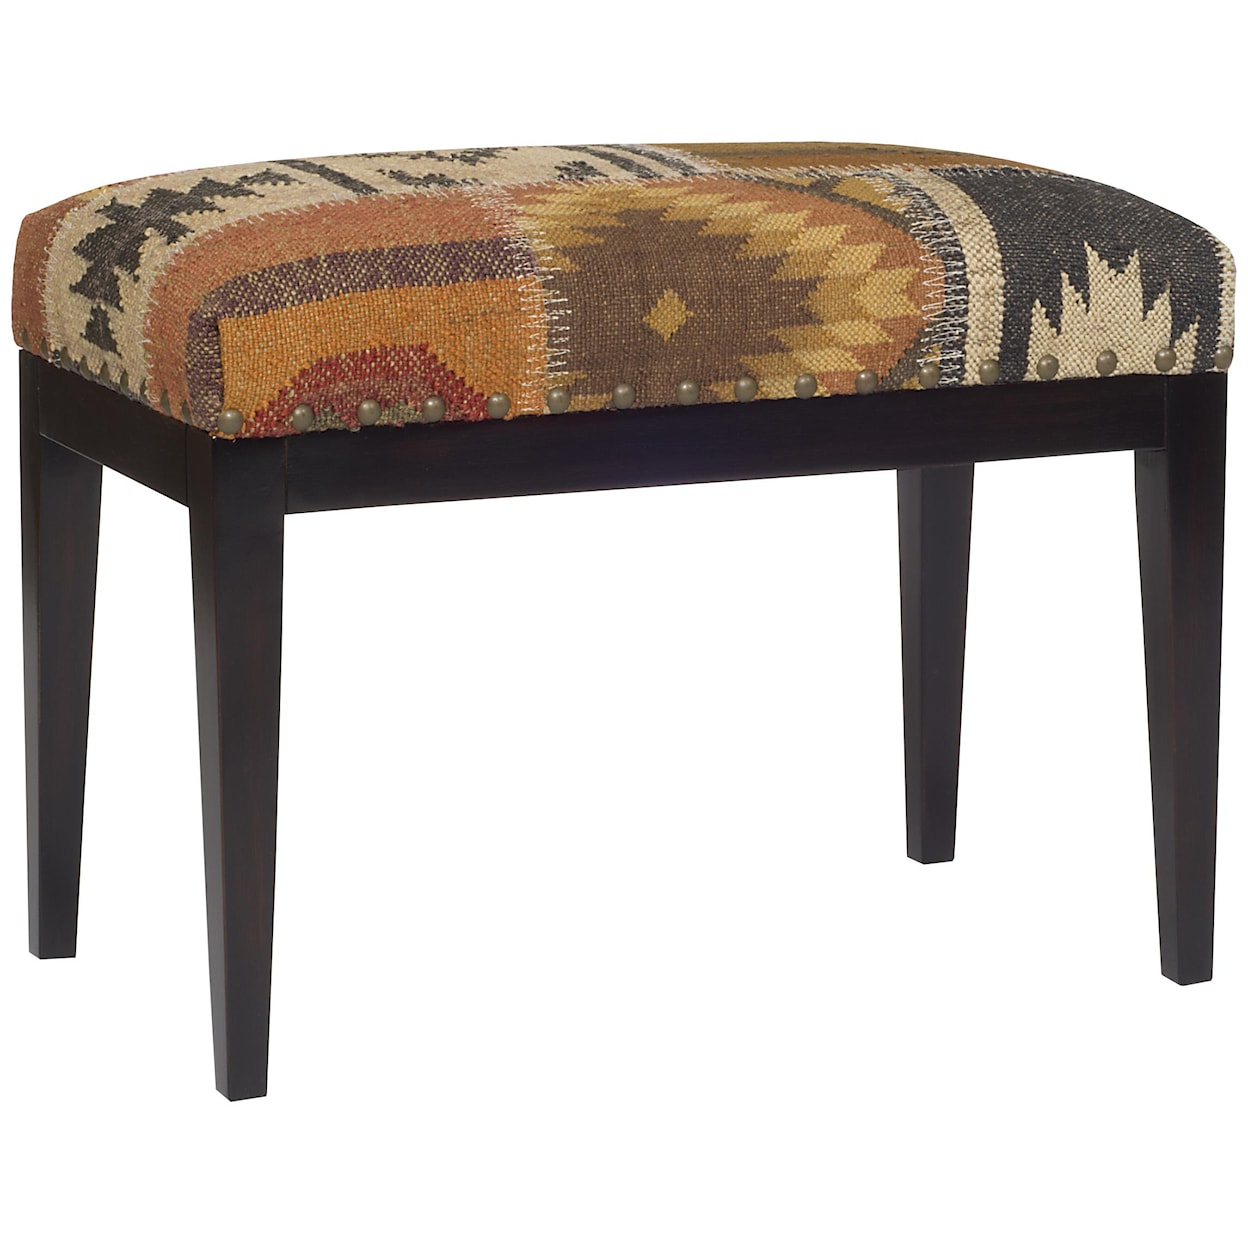 Vanguard Furniture Accent and Entertainment Chests and Tables Ottoman